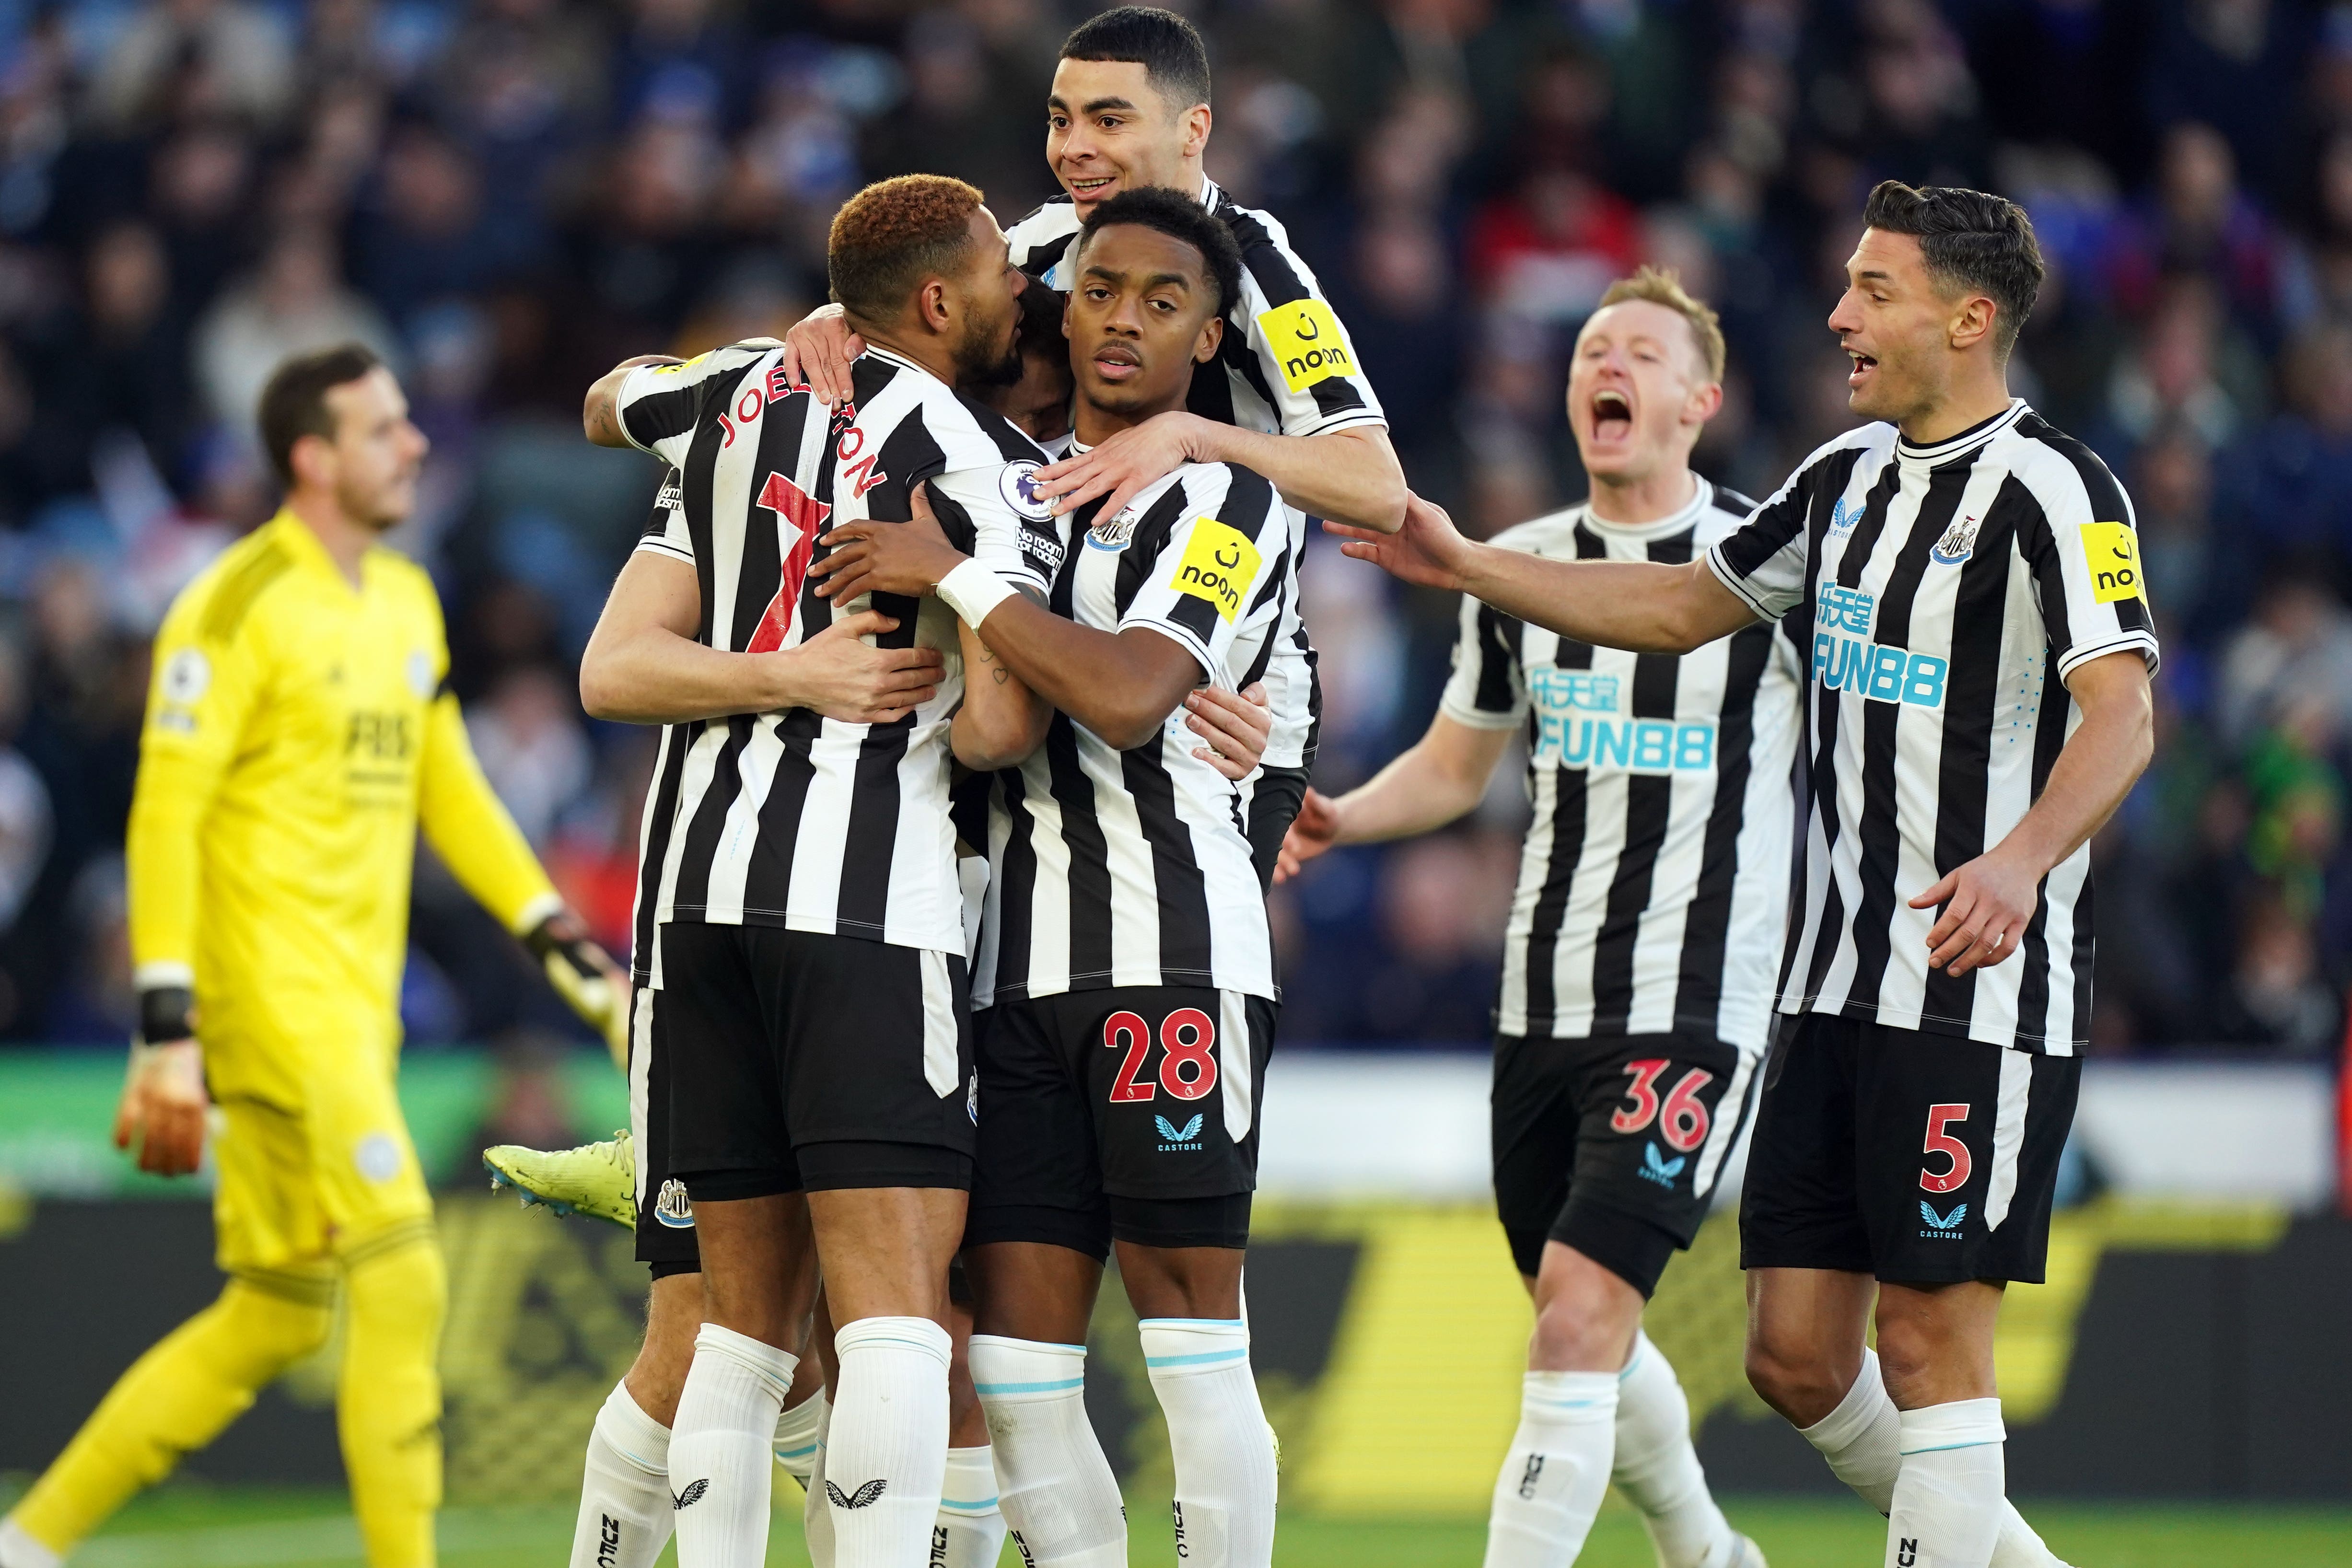 Newcastle players celebrate after scoring at Leicester (Mike Egerton/PA)